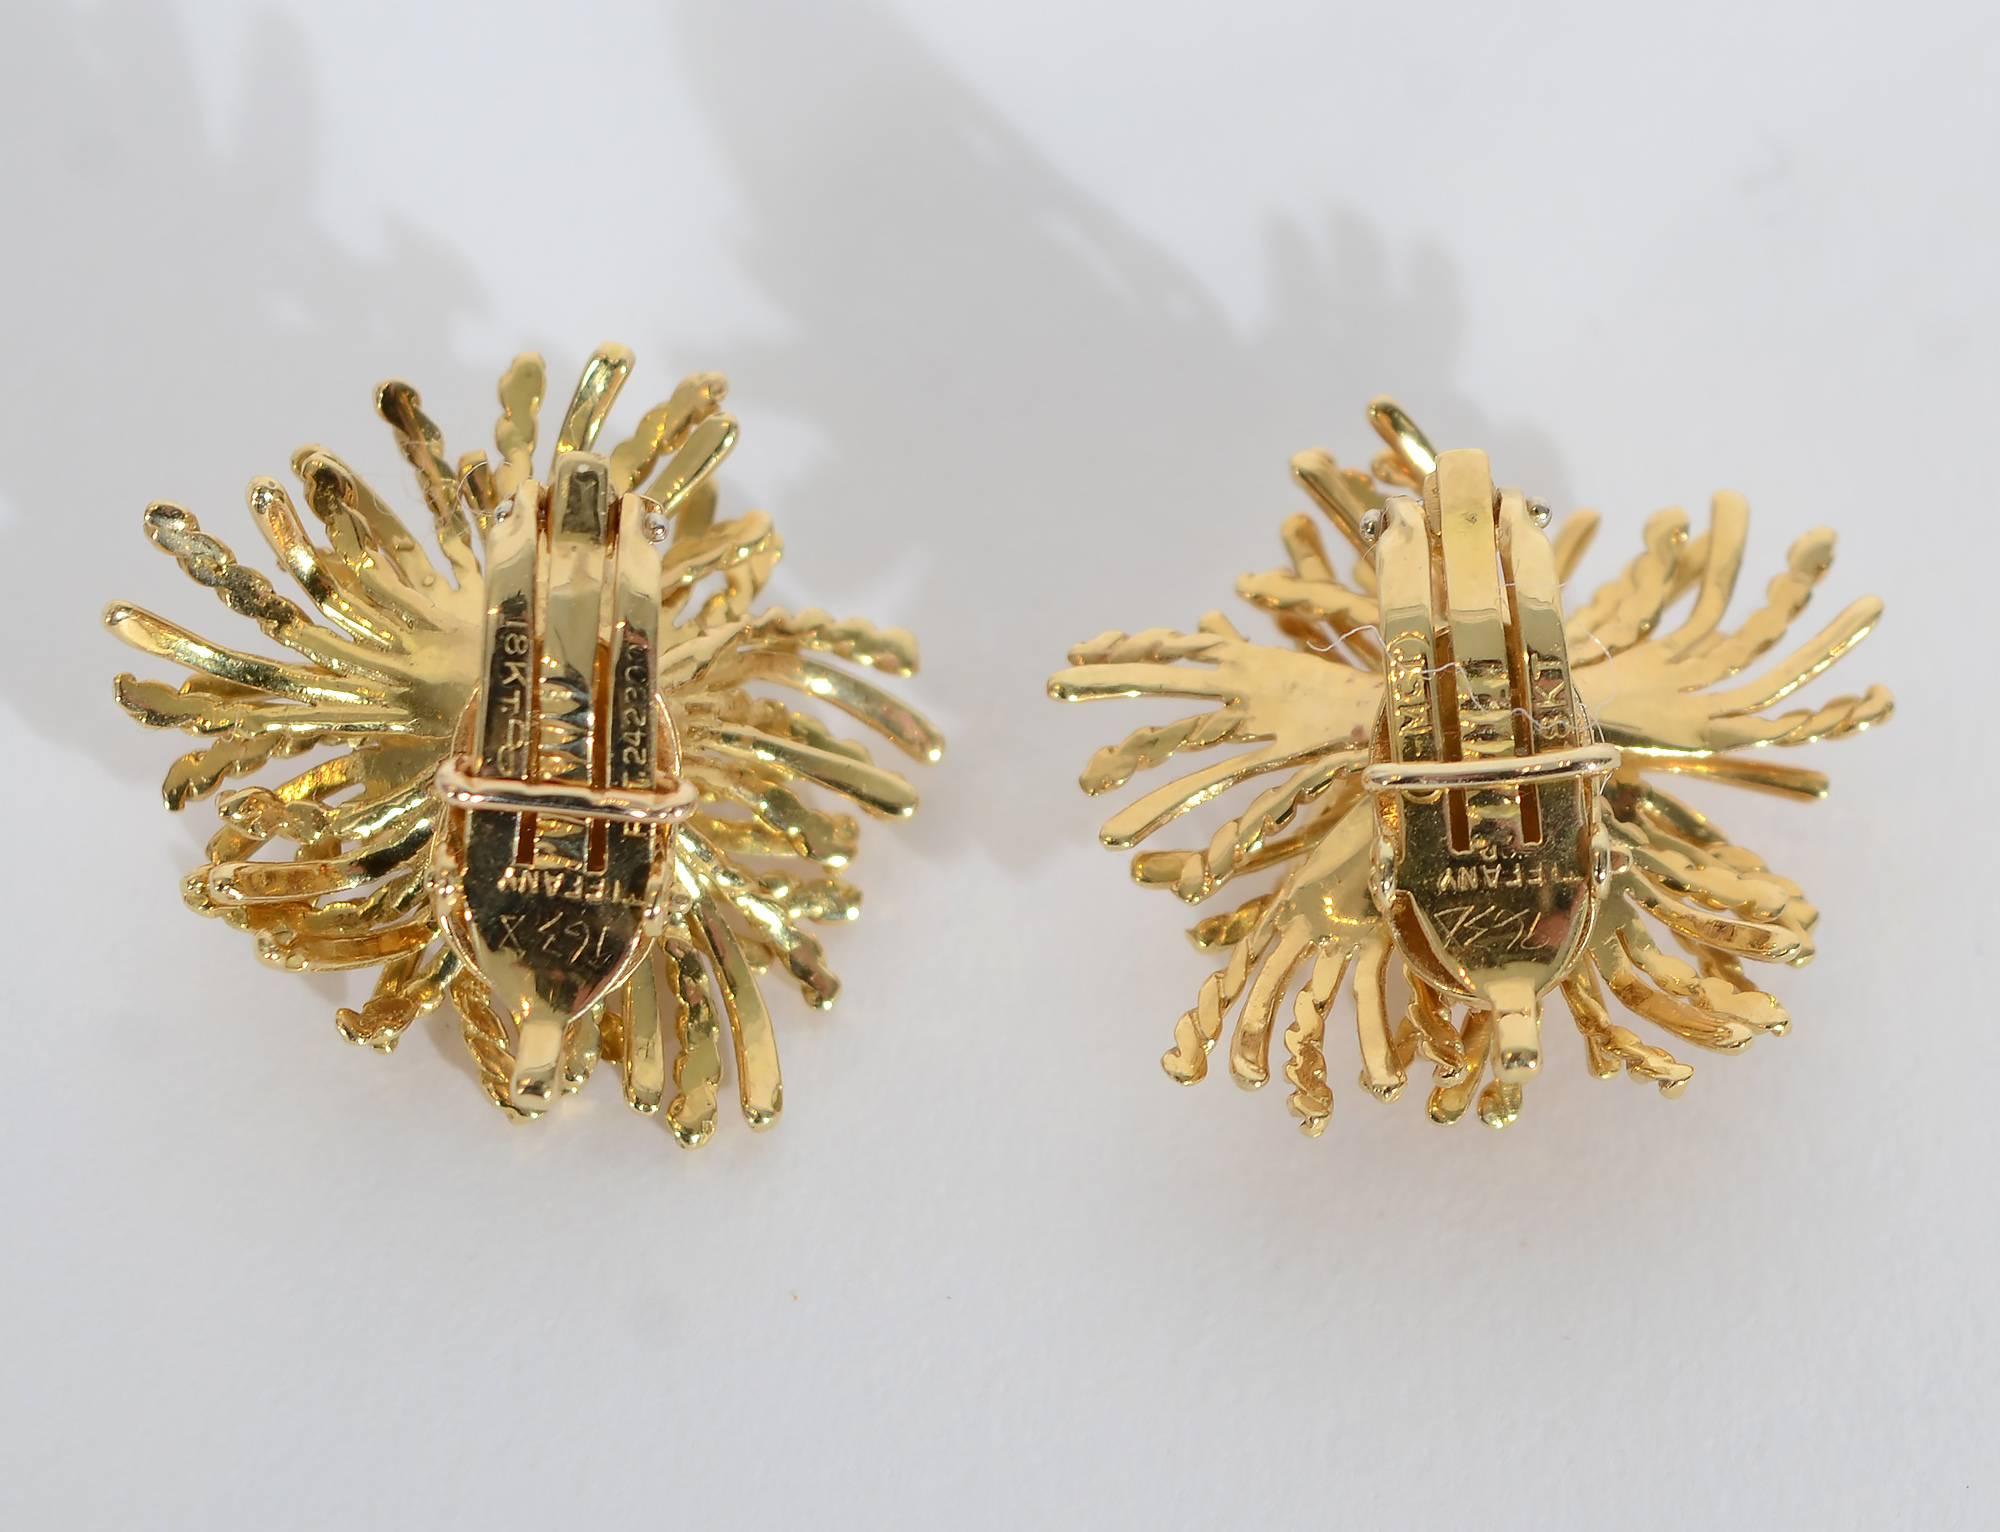 Spikey gold ear clips by Tiffany in a design that resembles that resemble sea anemones. High gloss and twisted gold wires alternate to add dimension to this very sculptural form. Clip backs can be converted to posts.